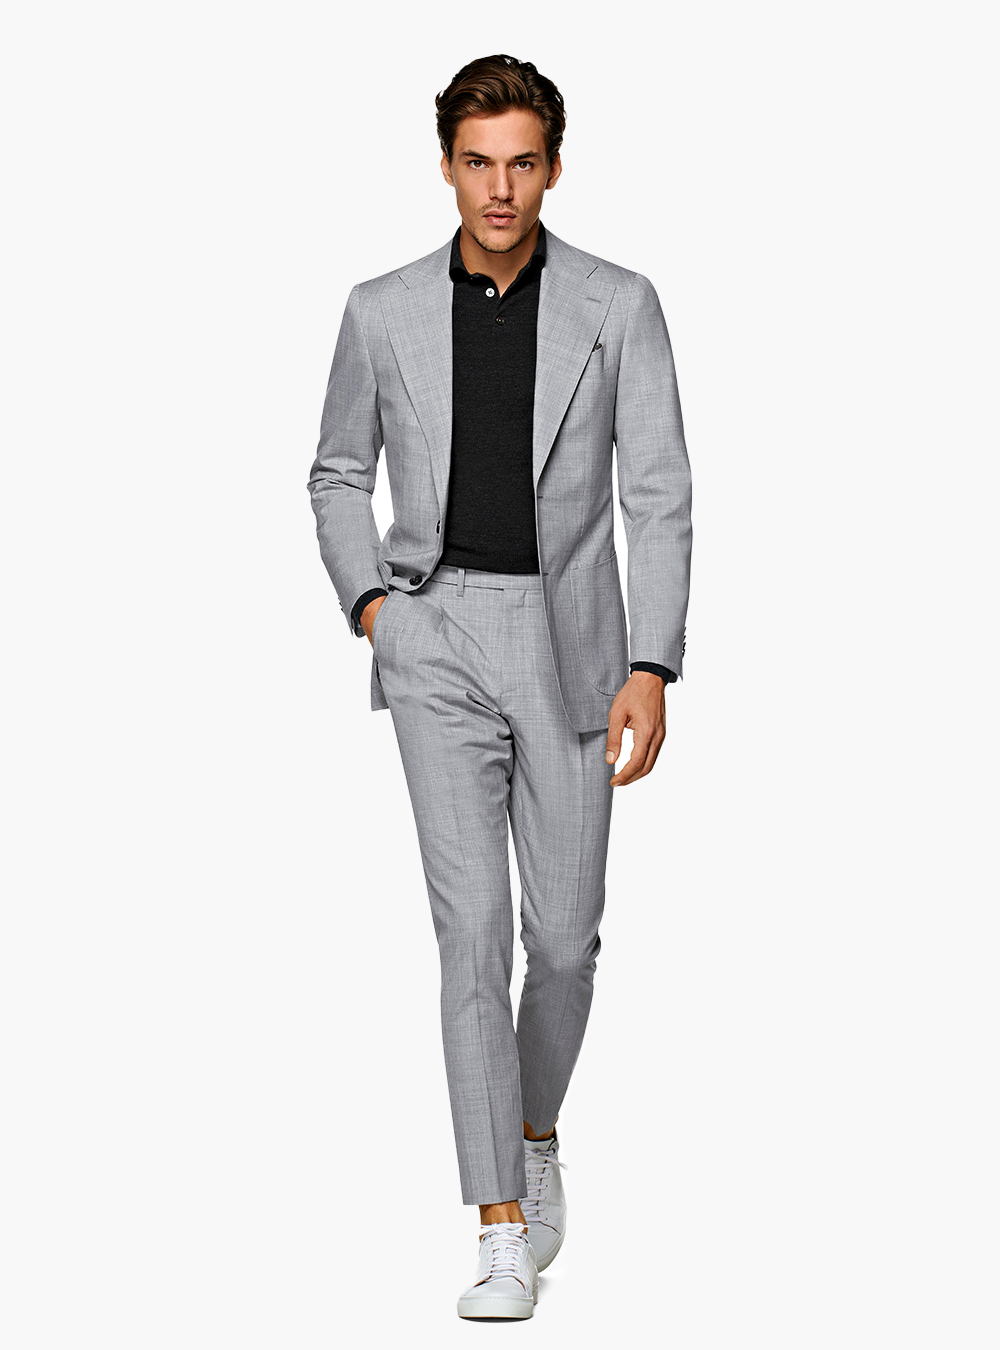 light grey suit, black polo shirt, and white sneakers